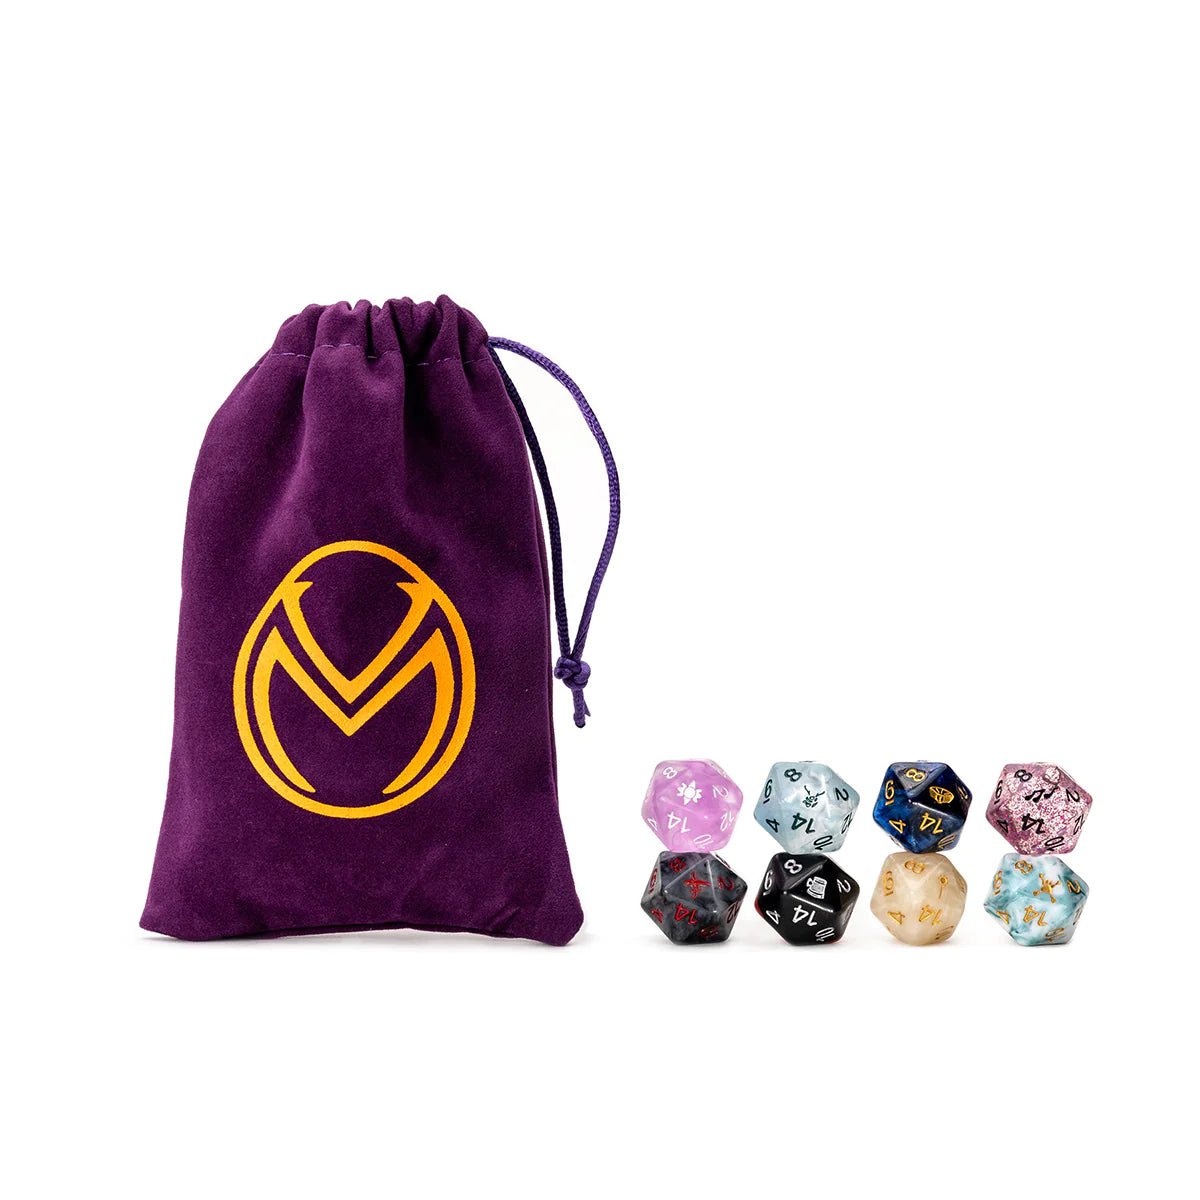 Vox Machina d20 Dice Set (8d20 with Bag) - The Fourth Place